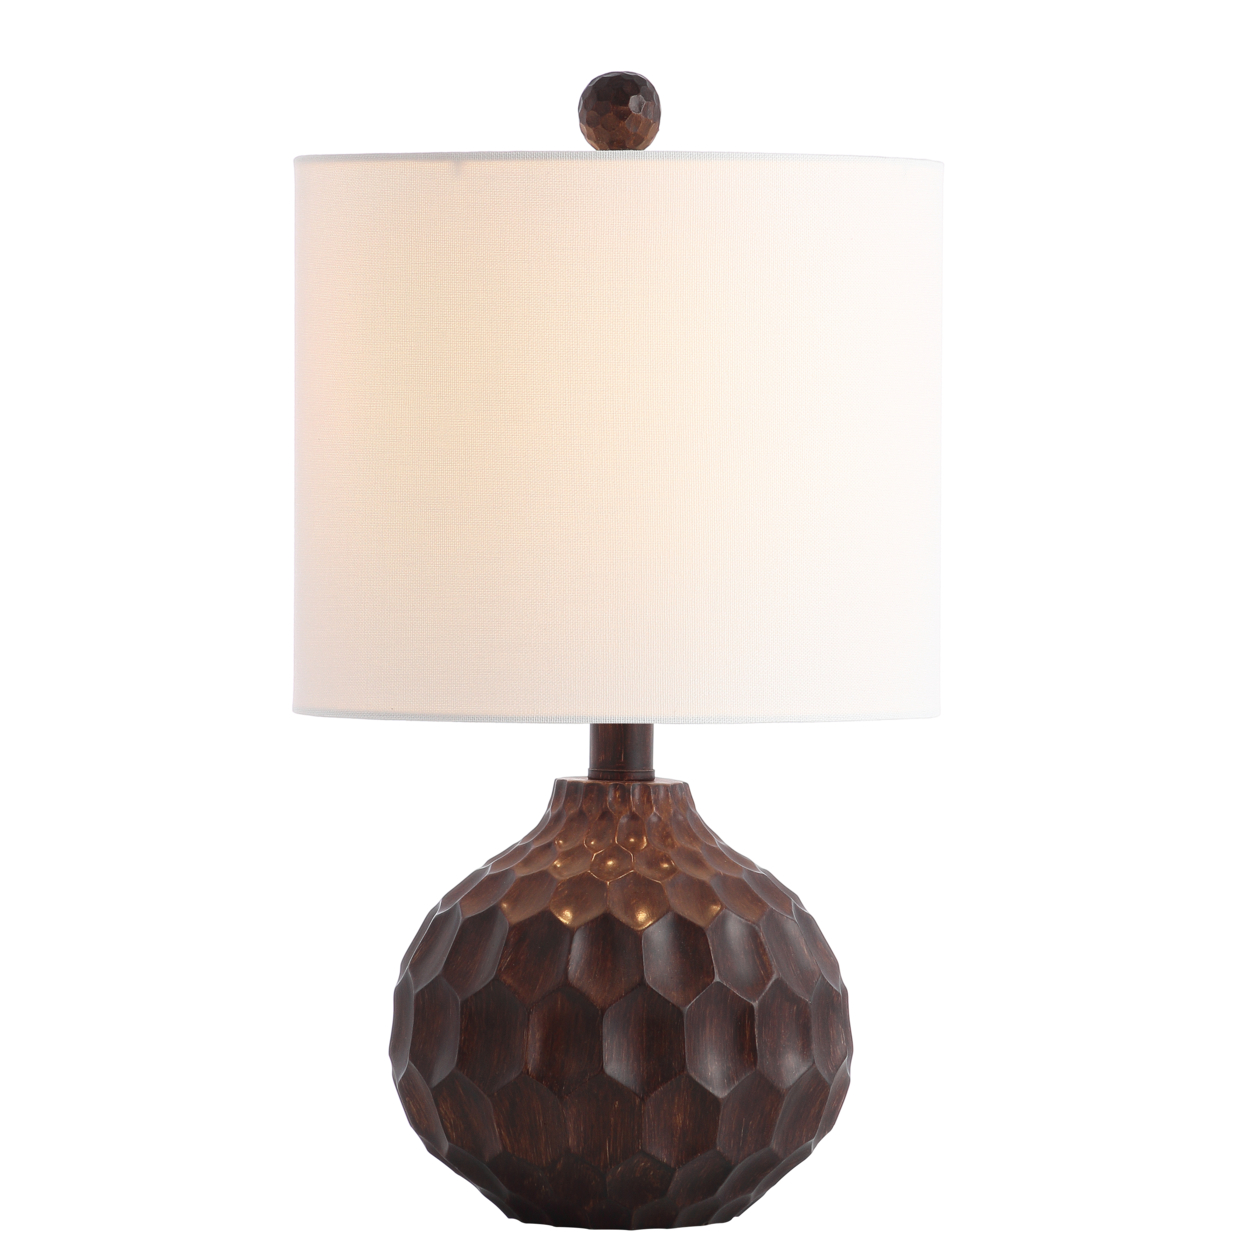 SAFAVIEH Canes Table Lamp , Antique Brown ,